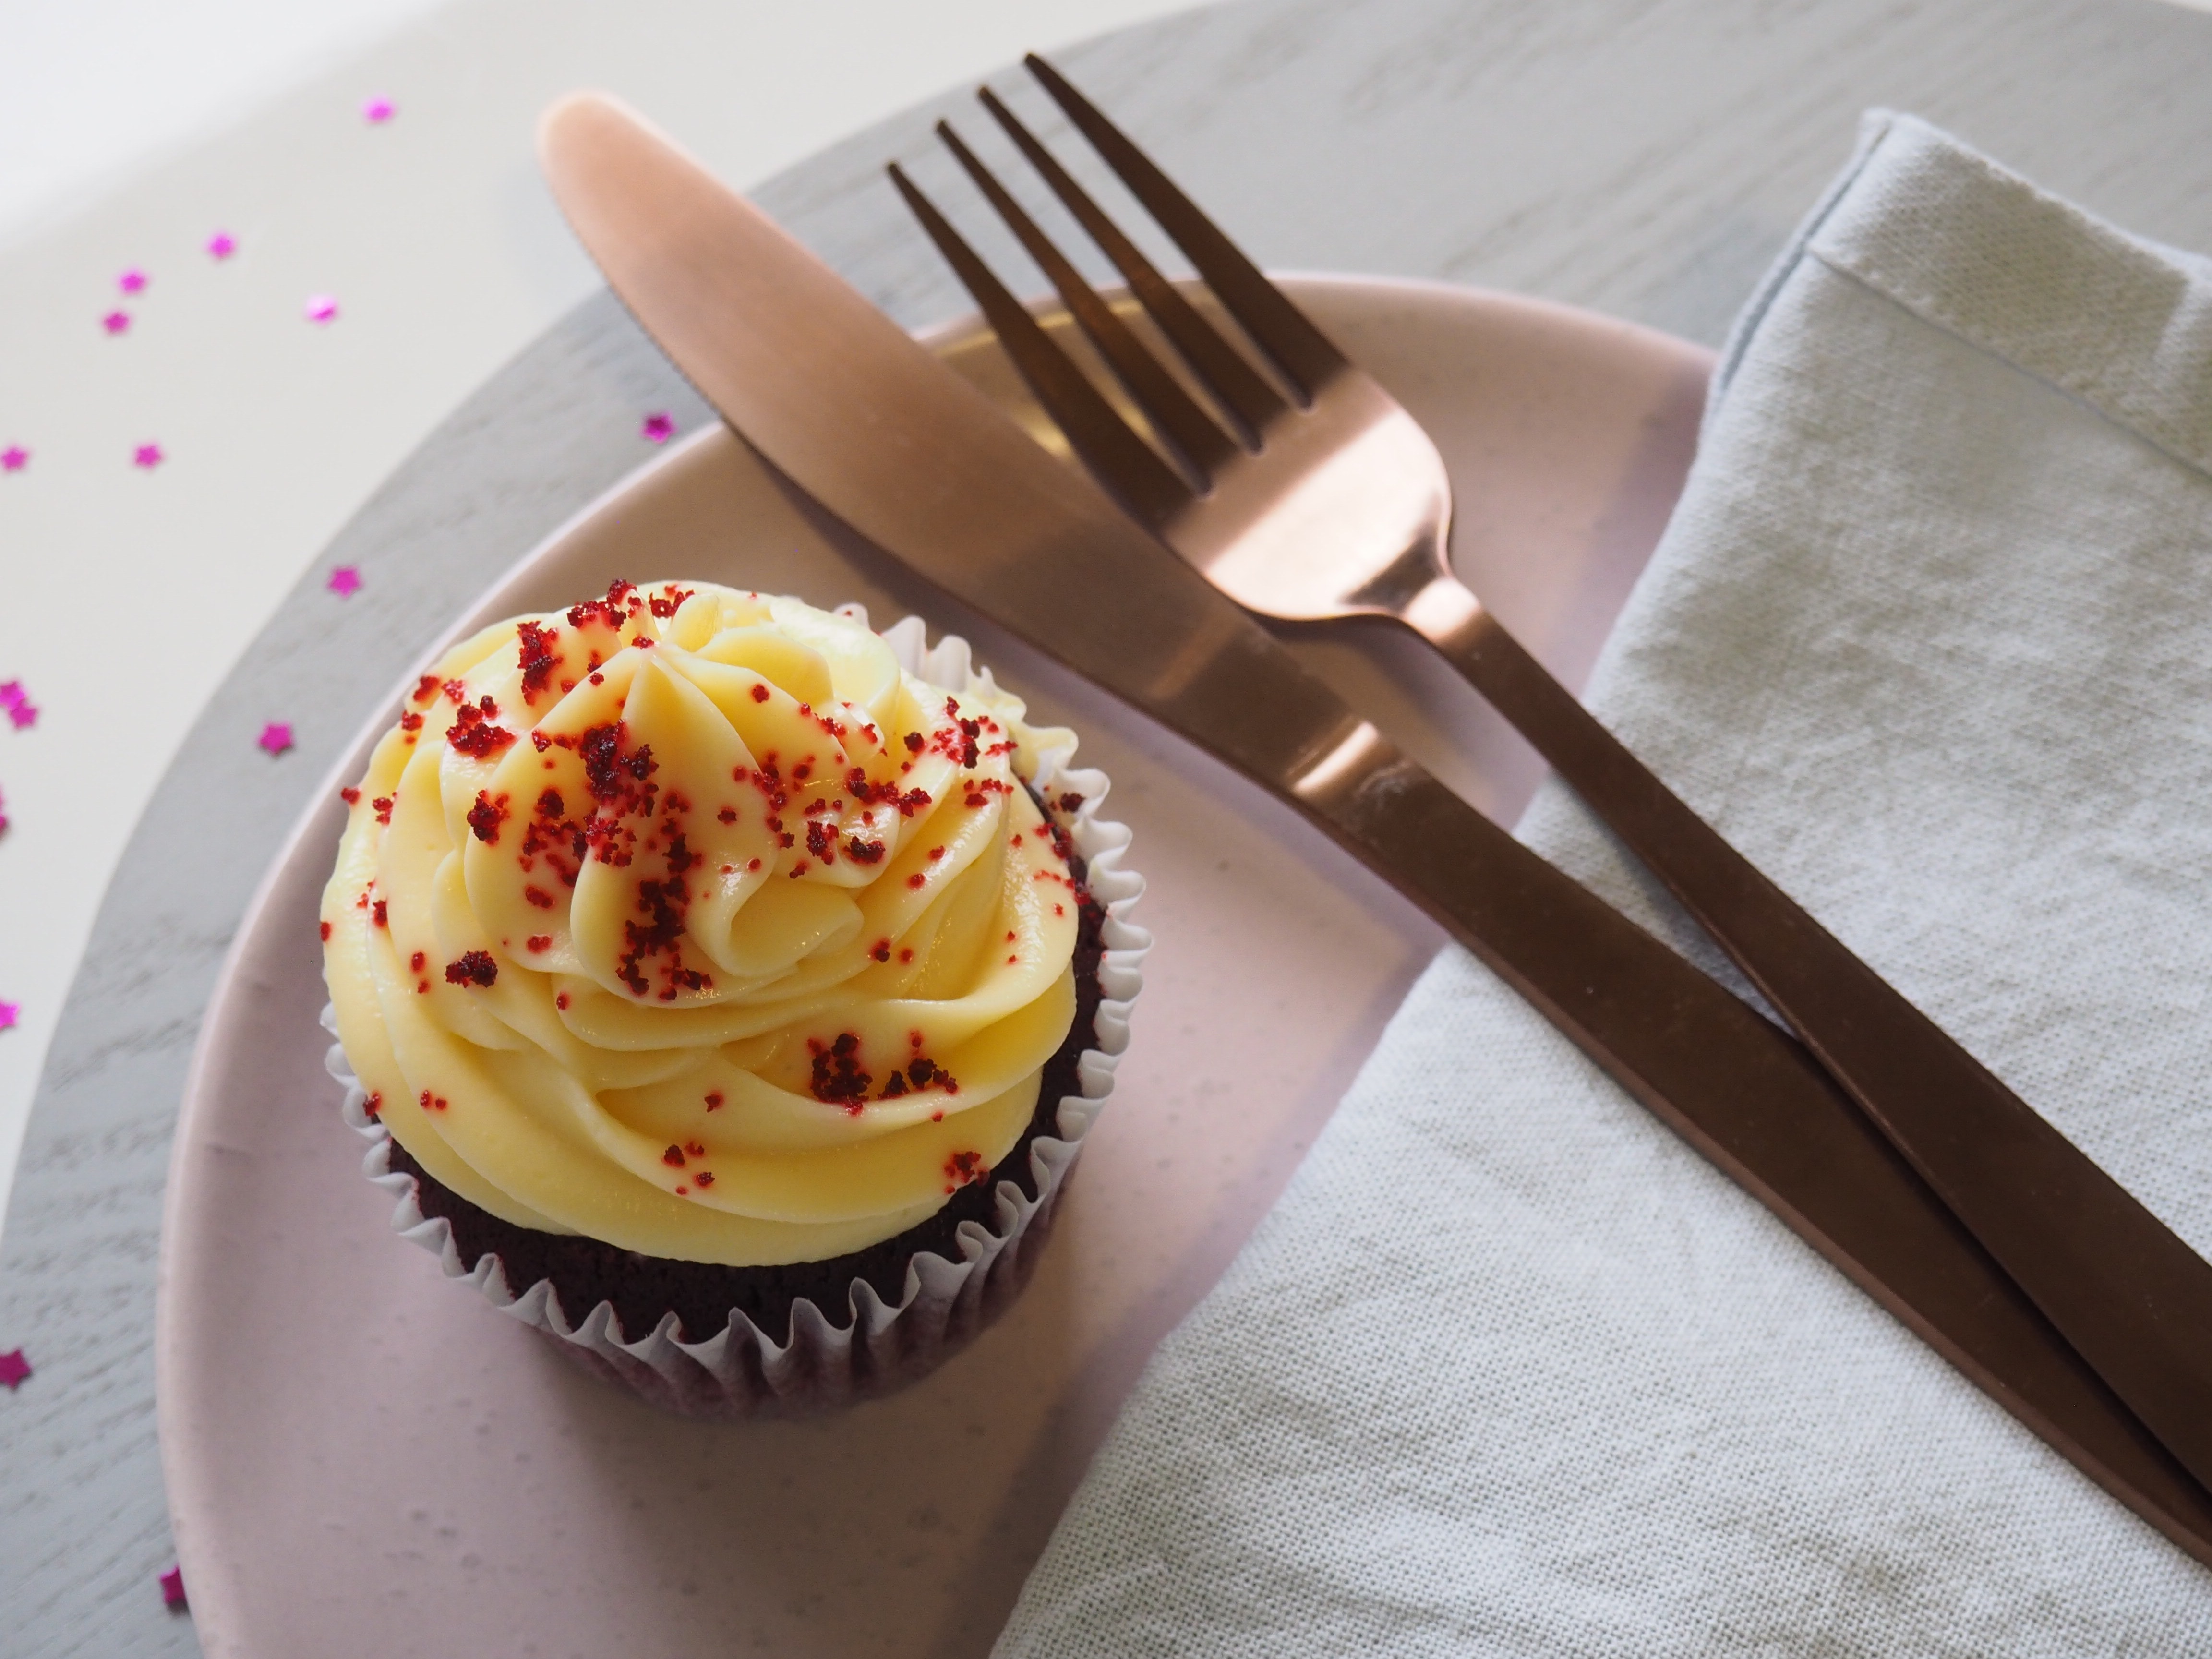 Silver fork and knife on round plate with cupcake photo